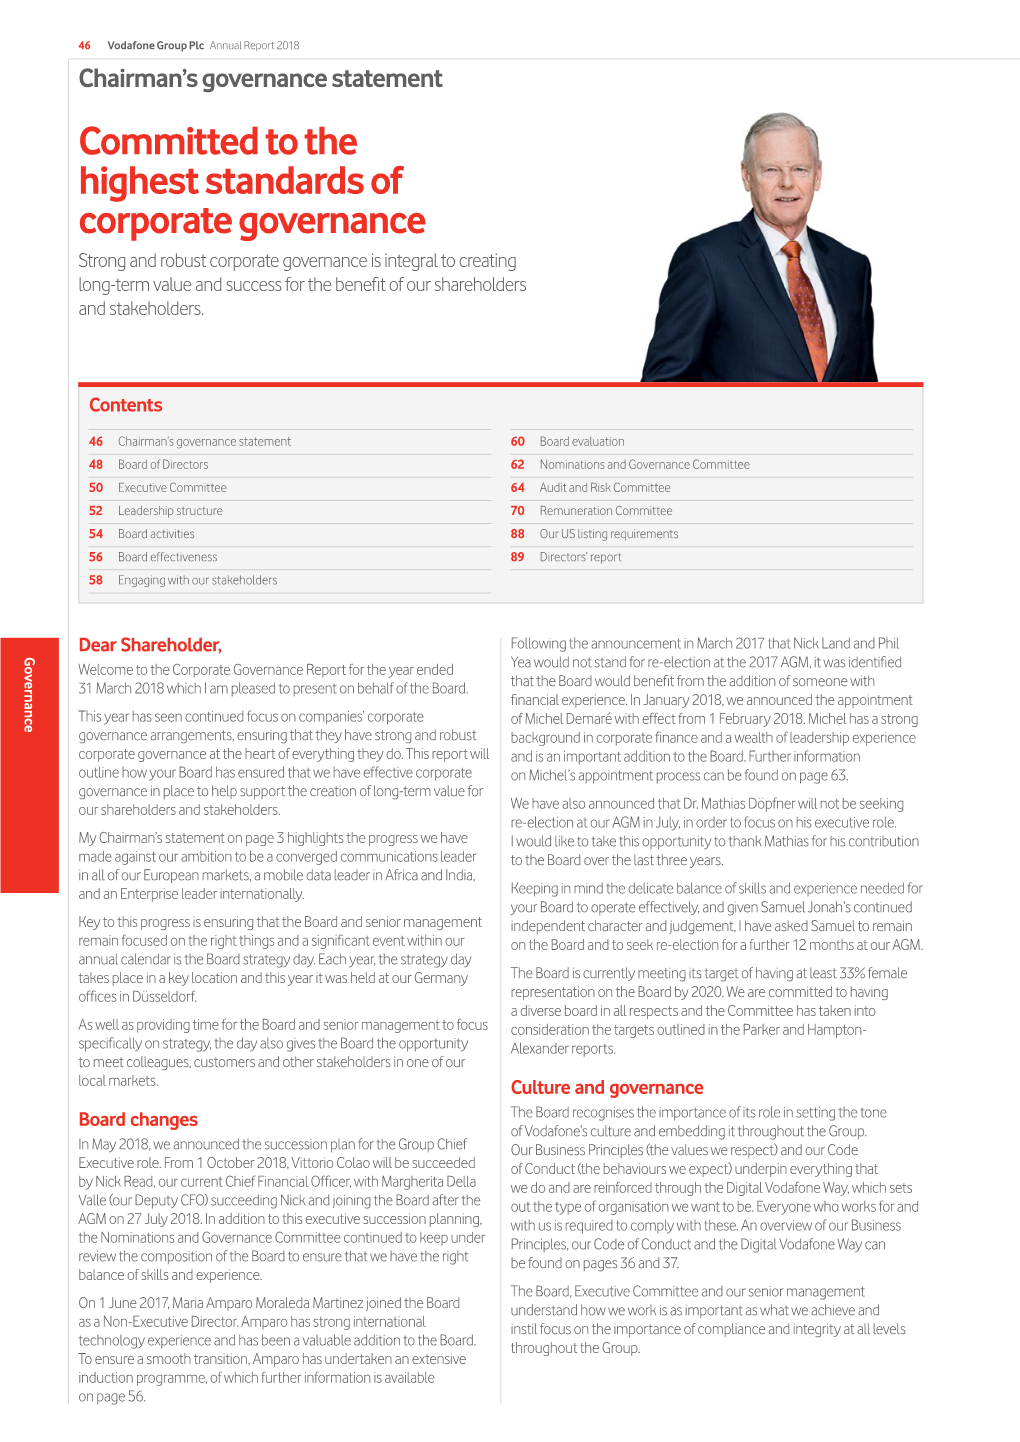 Vodafone Group Plc Annual Report for the Year Ended 31 March 2018